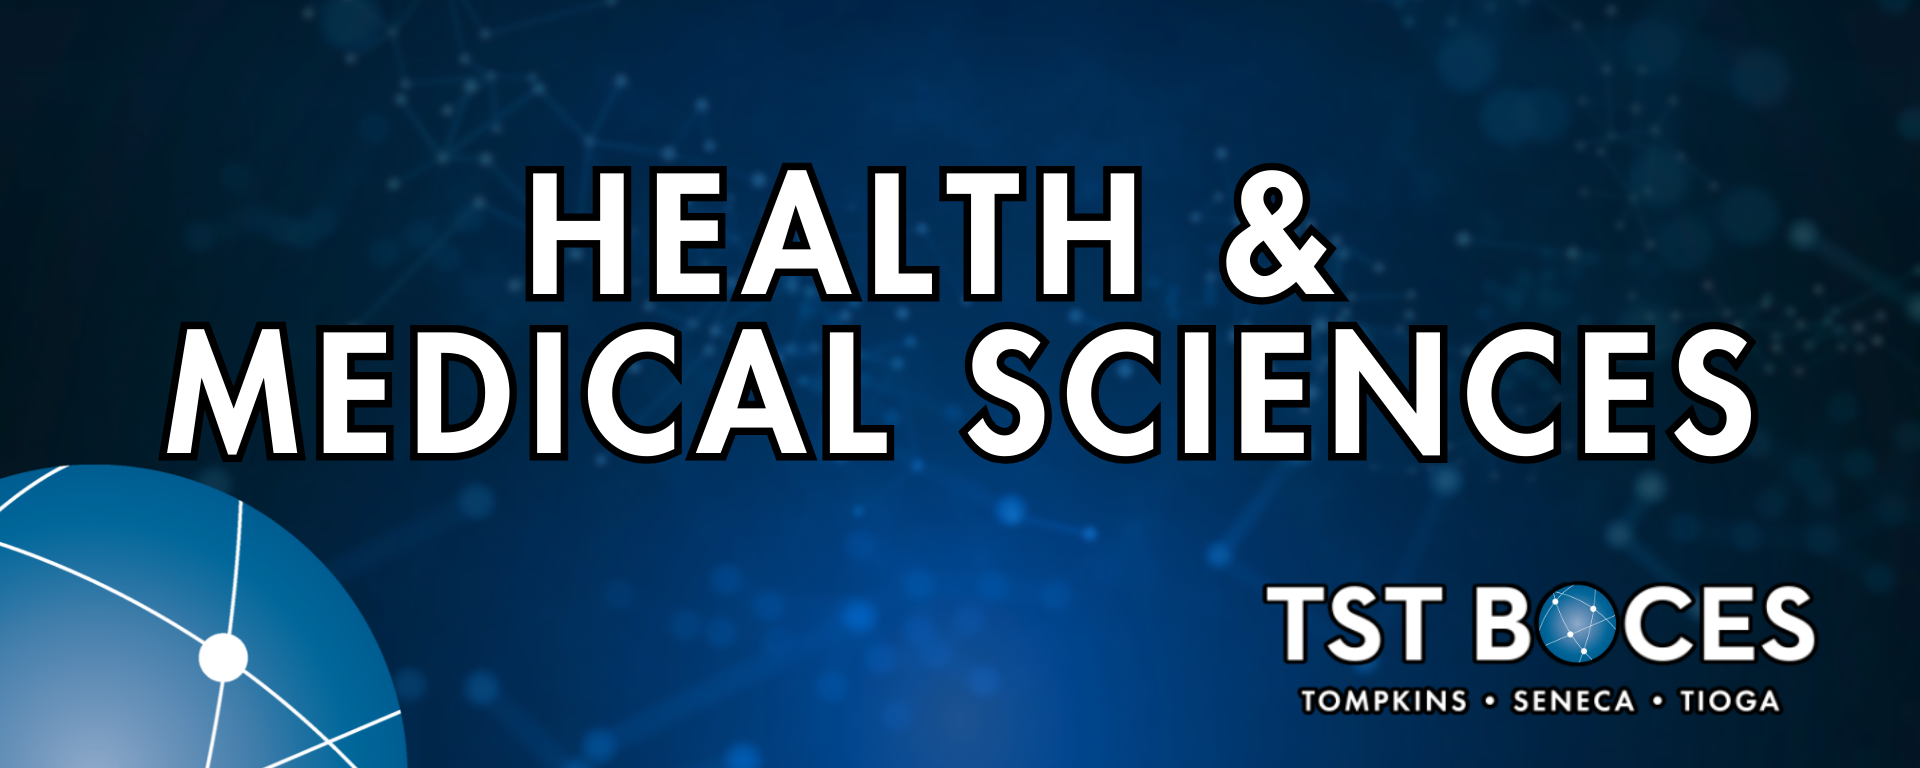 new visions health & medical sciences banner